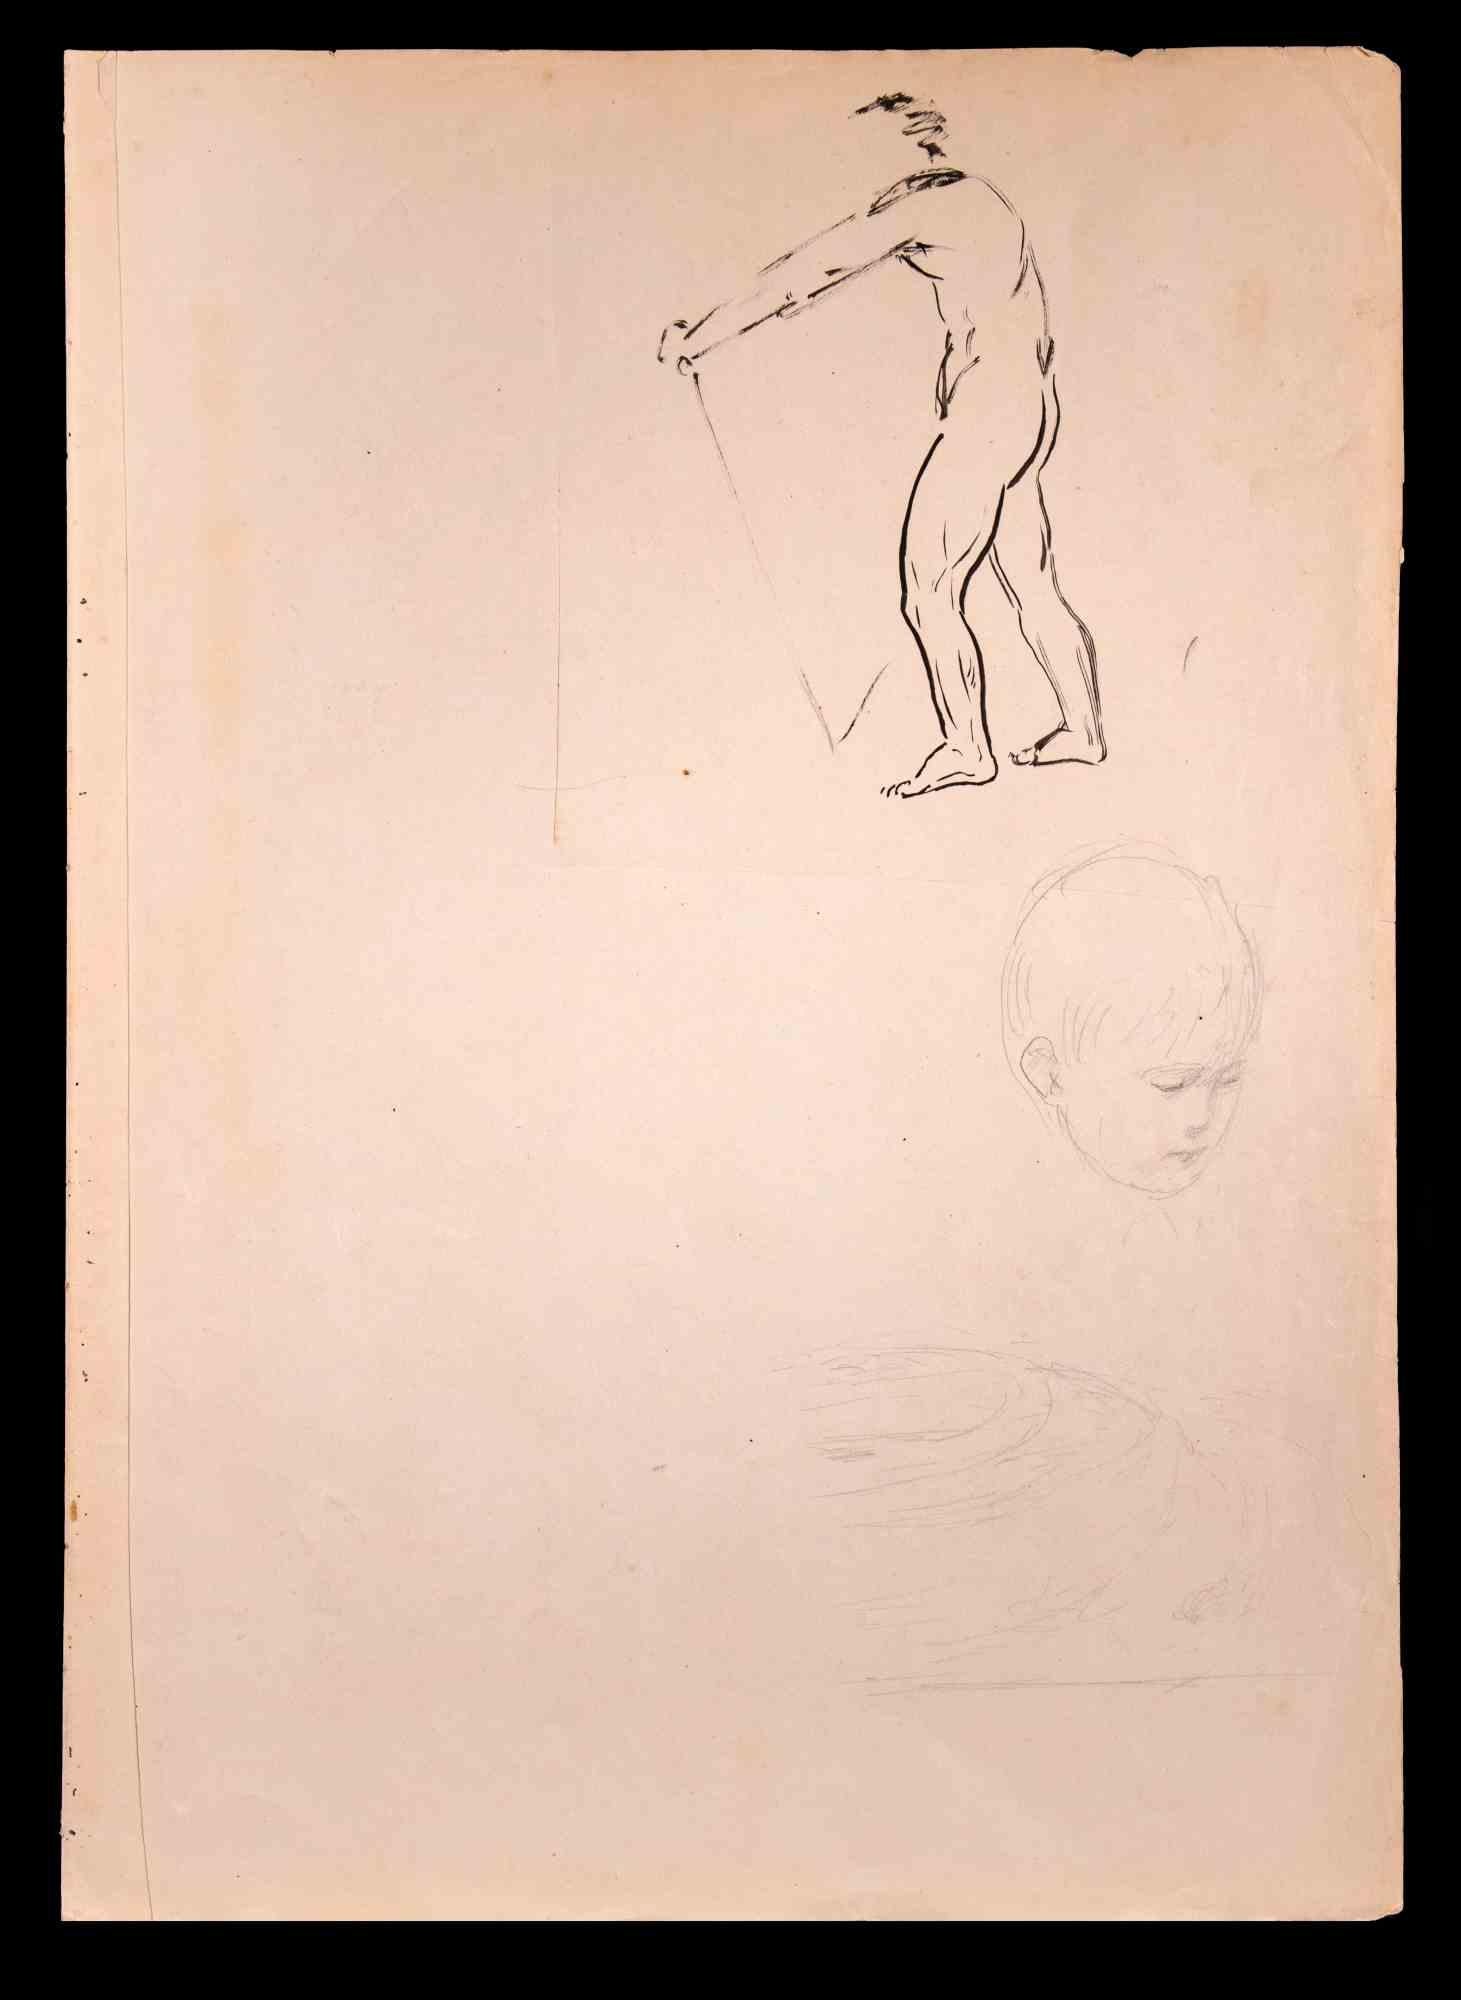 The Sketch - Drawing in pencil and China ink By Norbert Meyre - Mid 20th Century